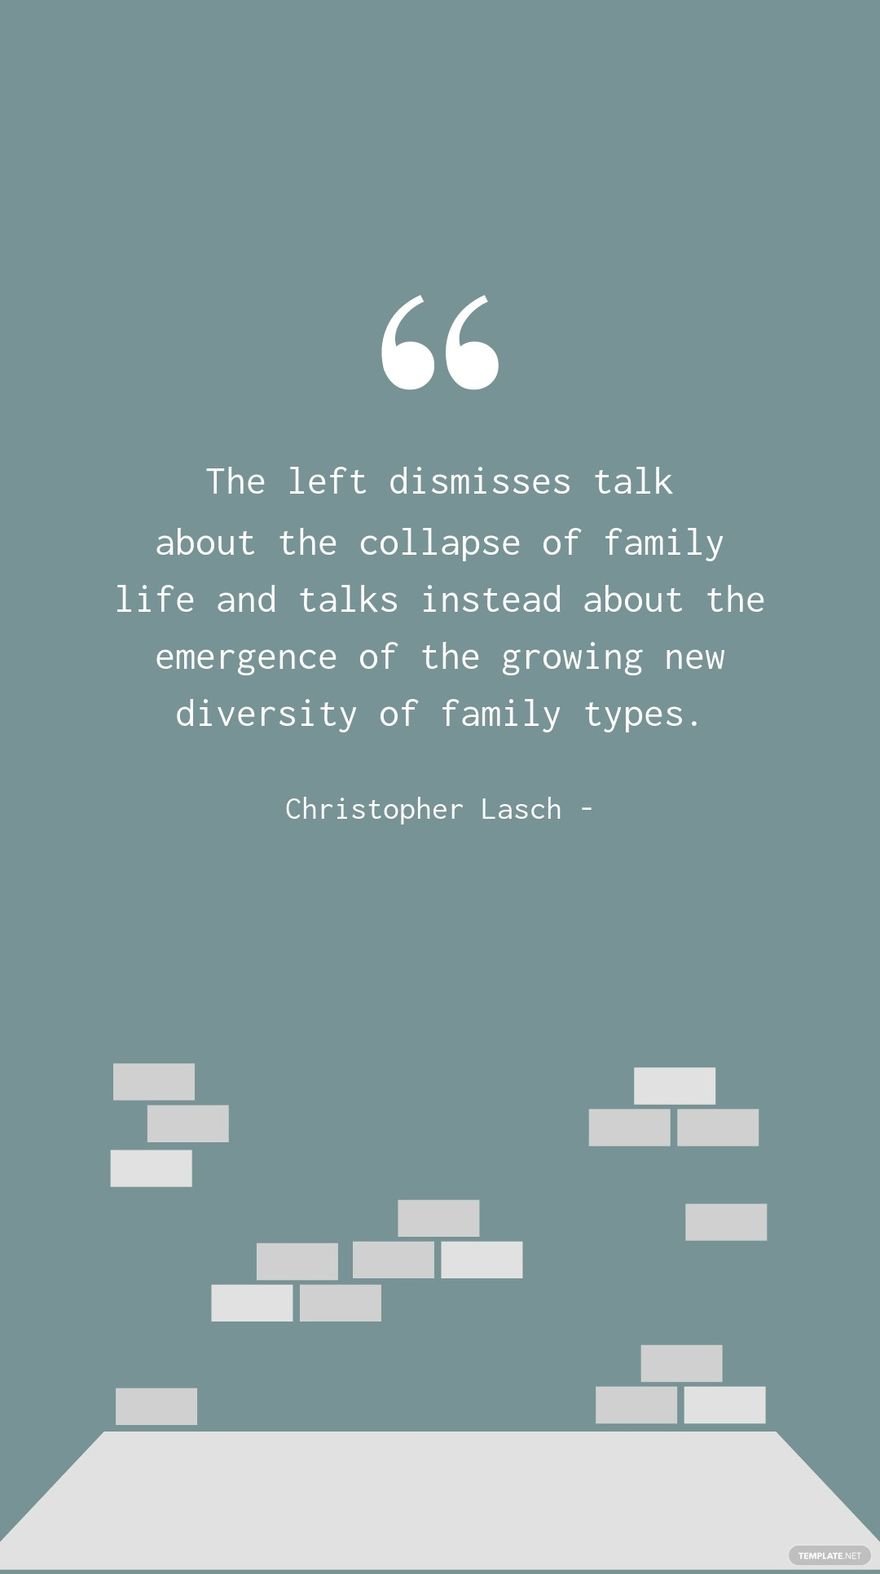 Free Christopher Lasch - The left dismisses talk about the collapse of family life and talks instead about the emergence of the growing new diversity of family types.